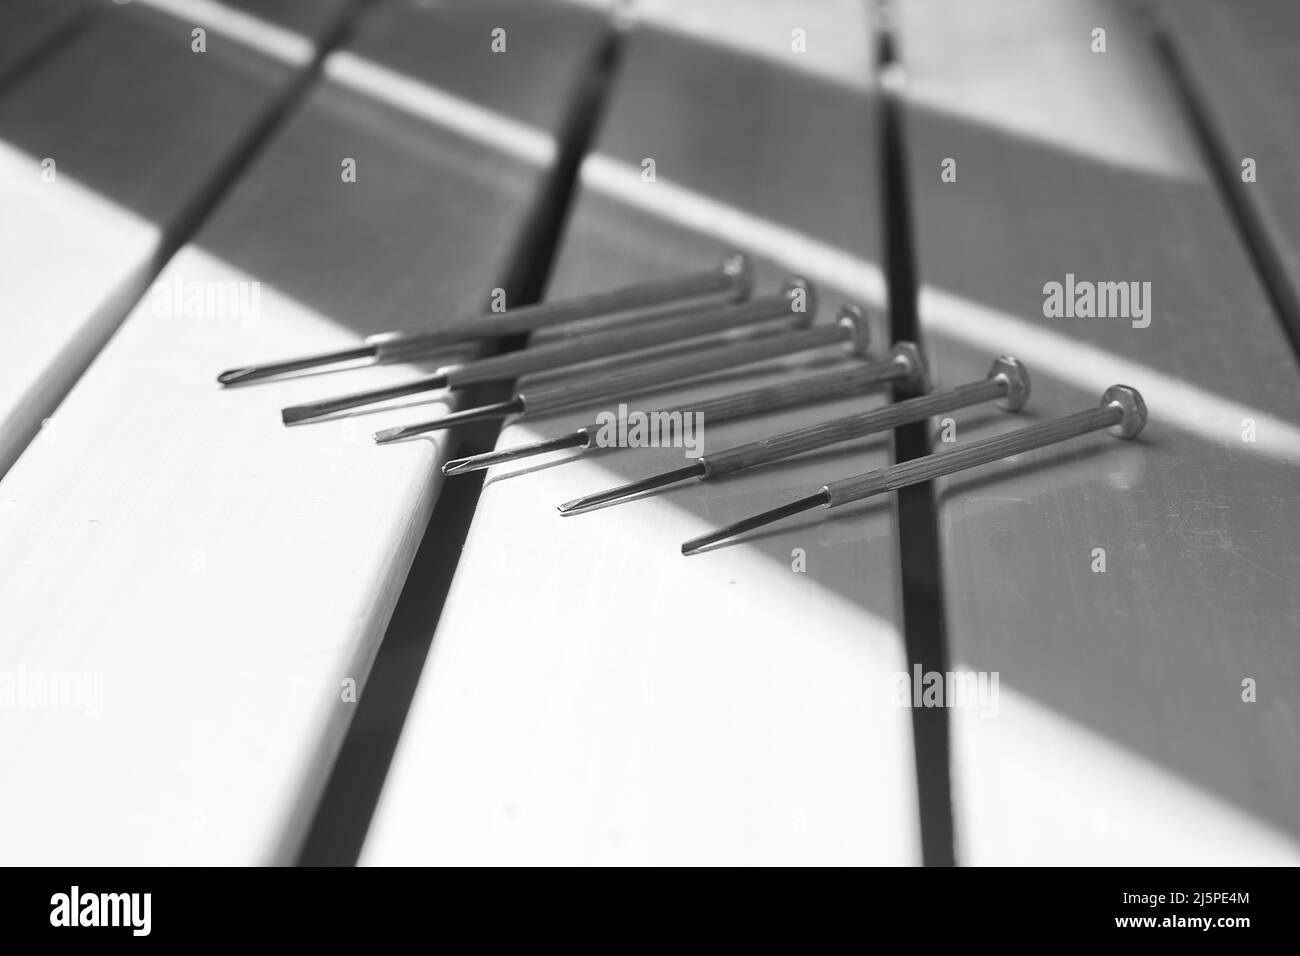 Repair set of metal screwdrivers on a black and white background Stock Photo